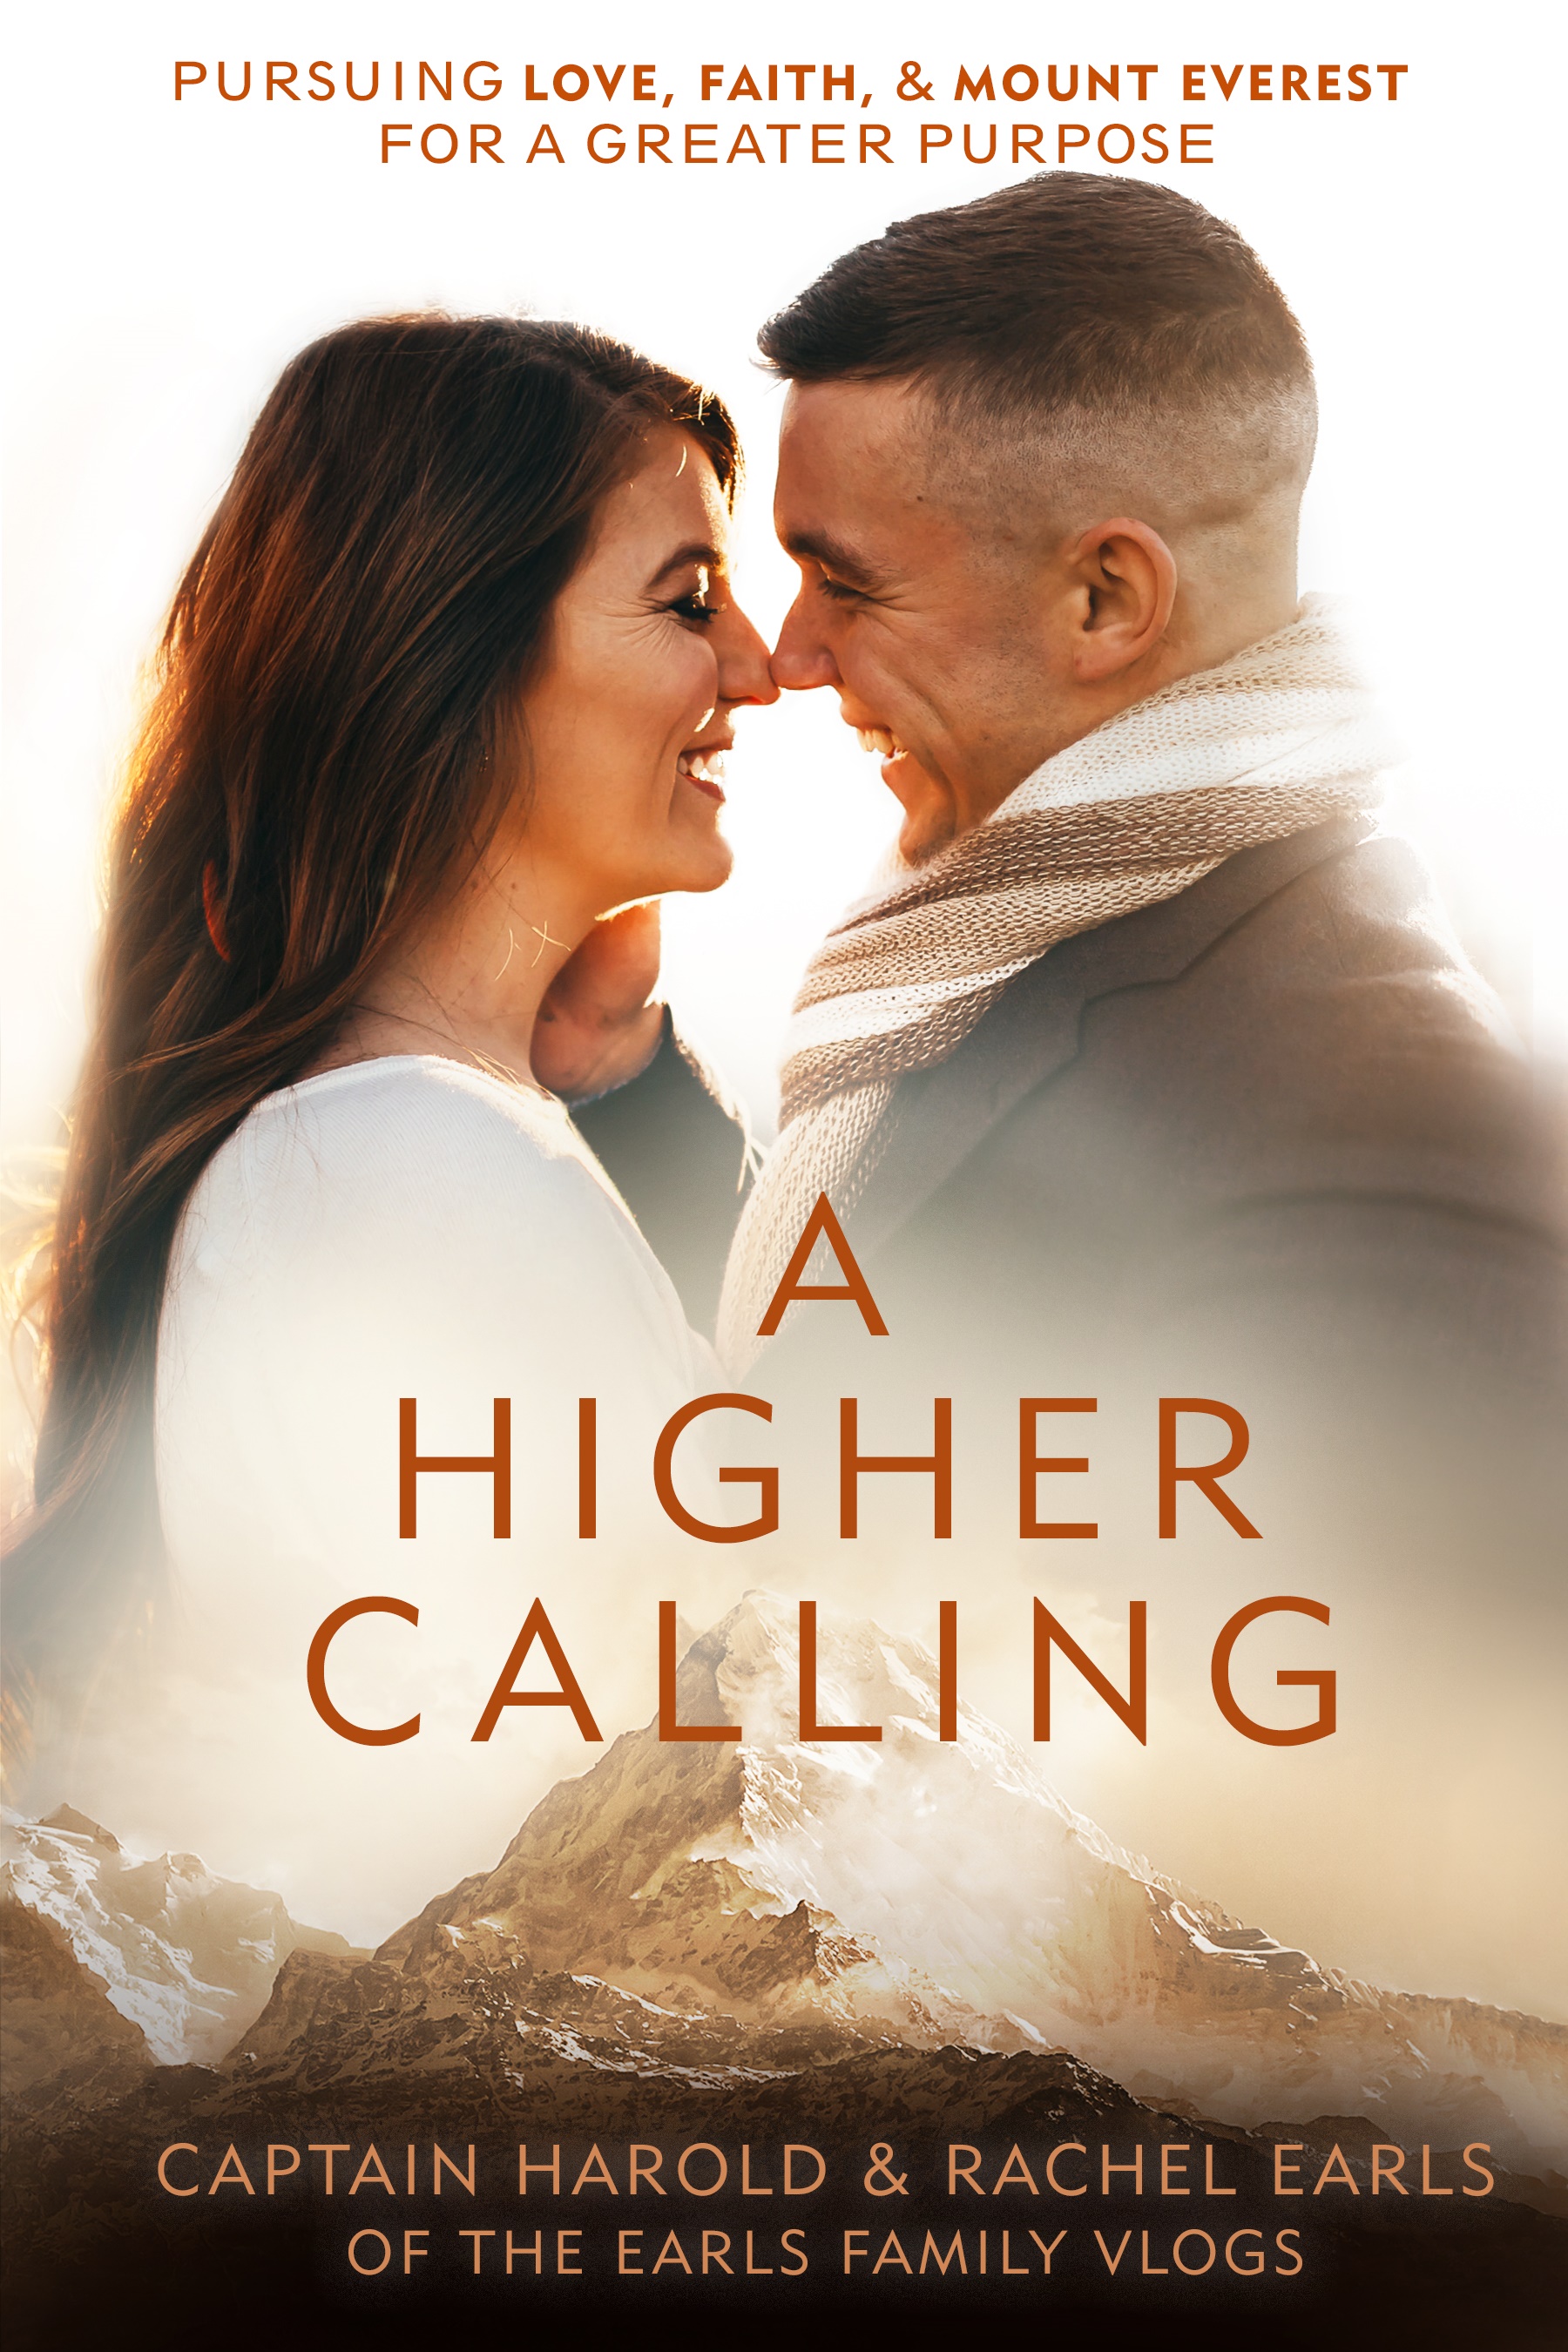 Higher calling. A higher Call. The higher calling COMMY book.